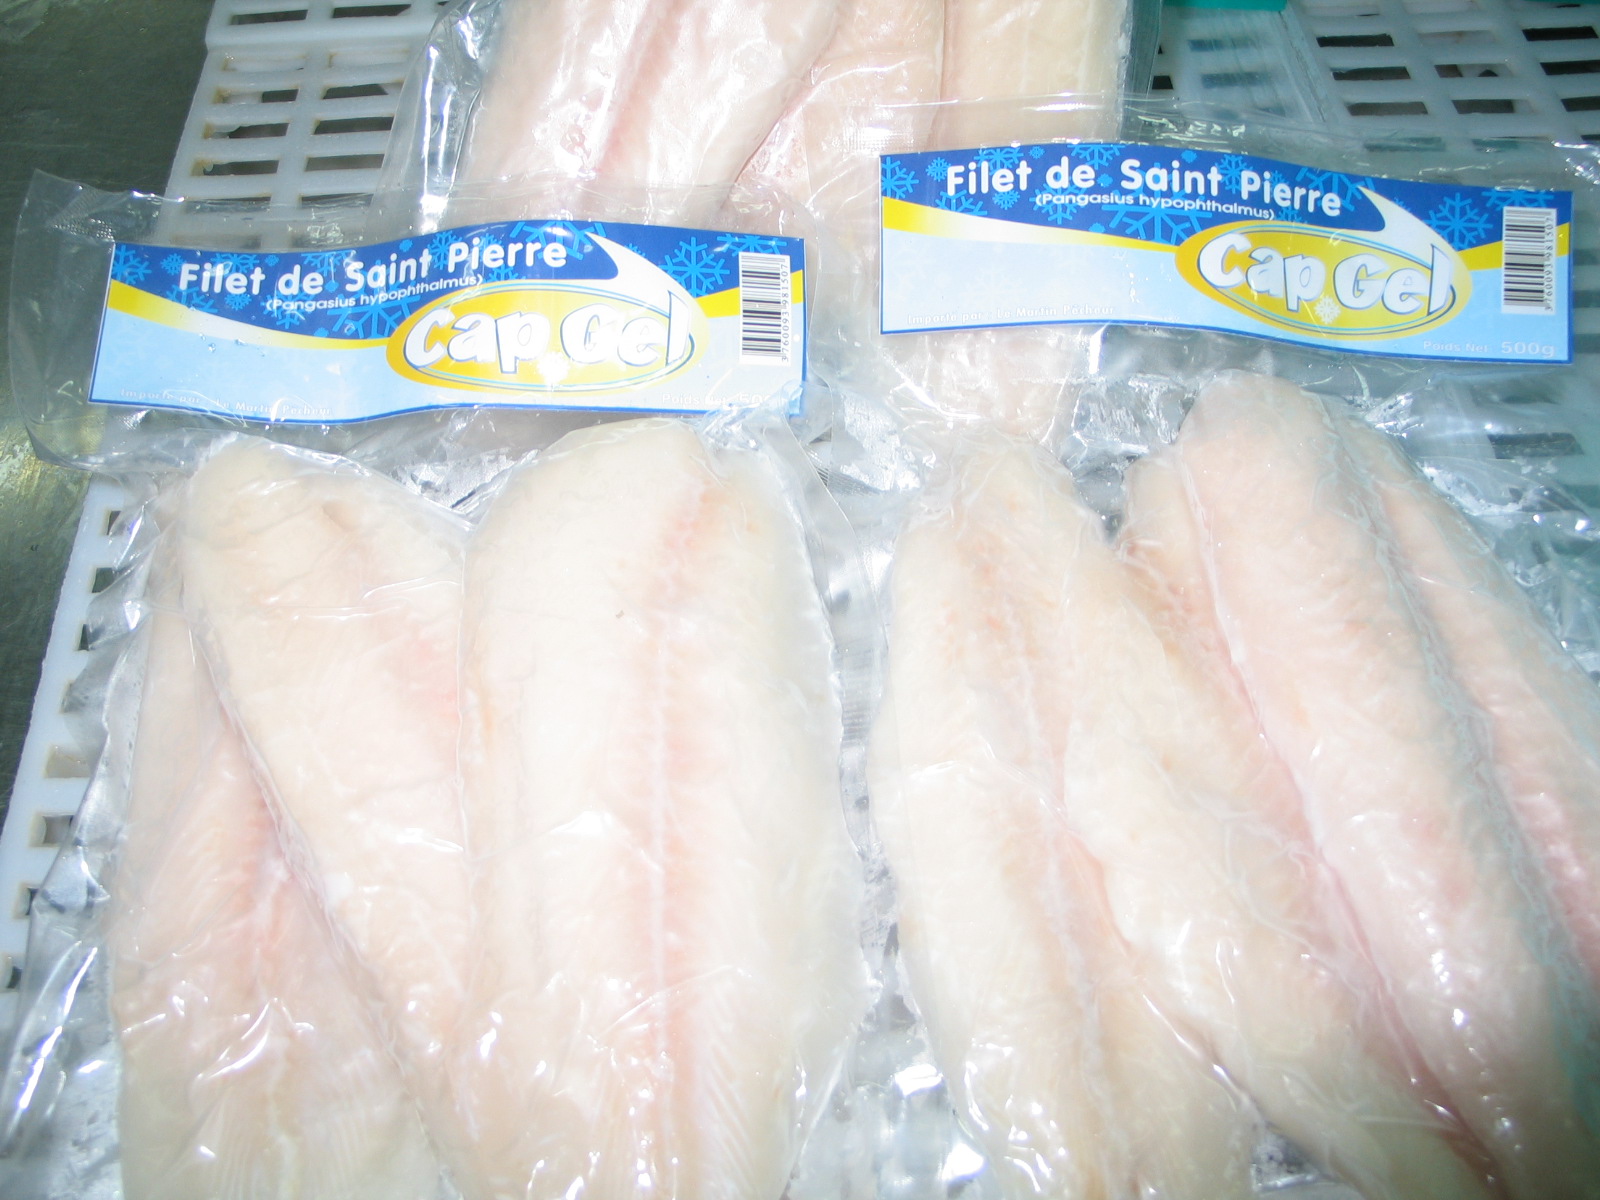 The segment of value-added products for tra fish